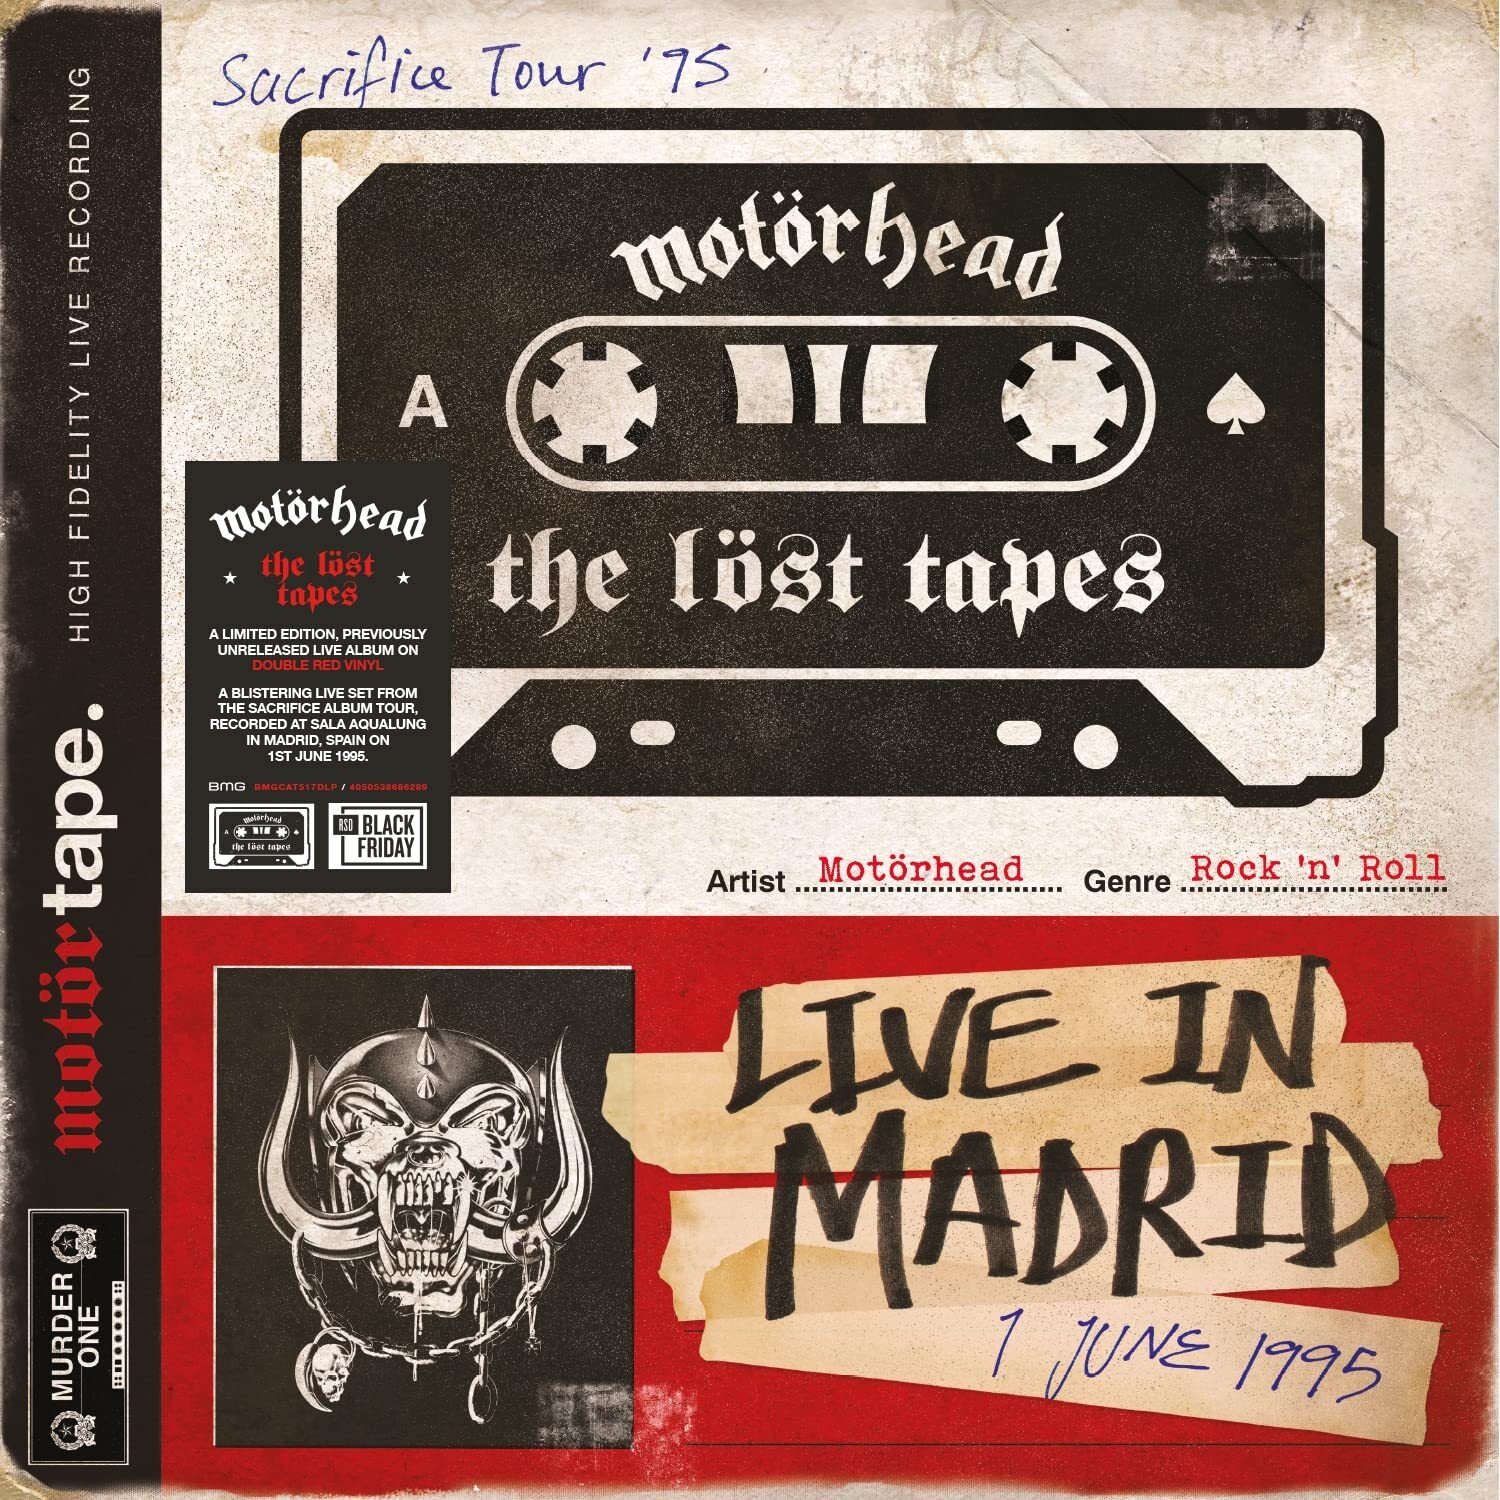 Виниловая Пластинка Motorhead The Lost Tapes Vol. 1 (Live In Madrid 1 June 1995) (4050538686289) винил 12” lp limited edition coloured various artists street born the ultimate